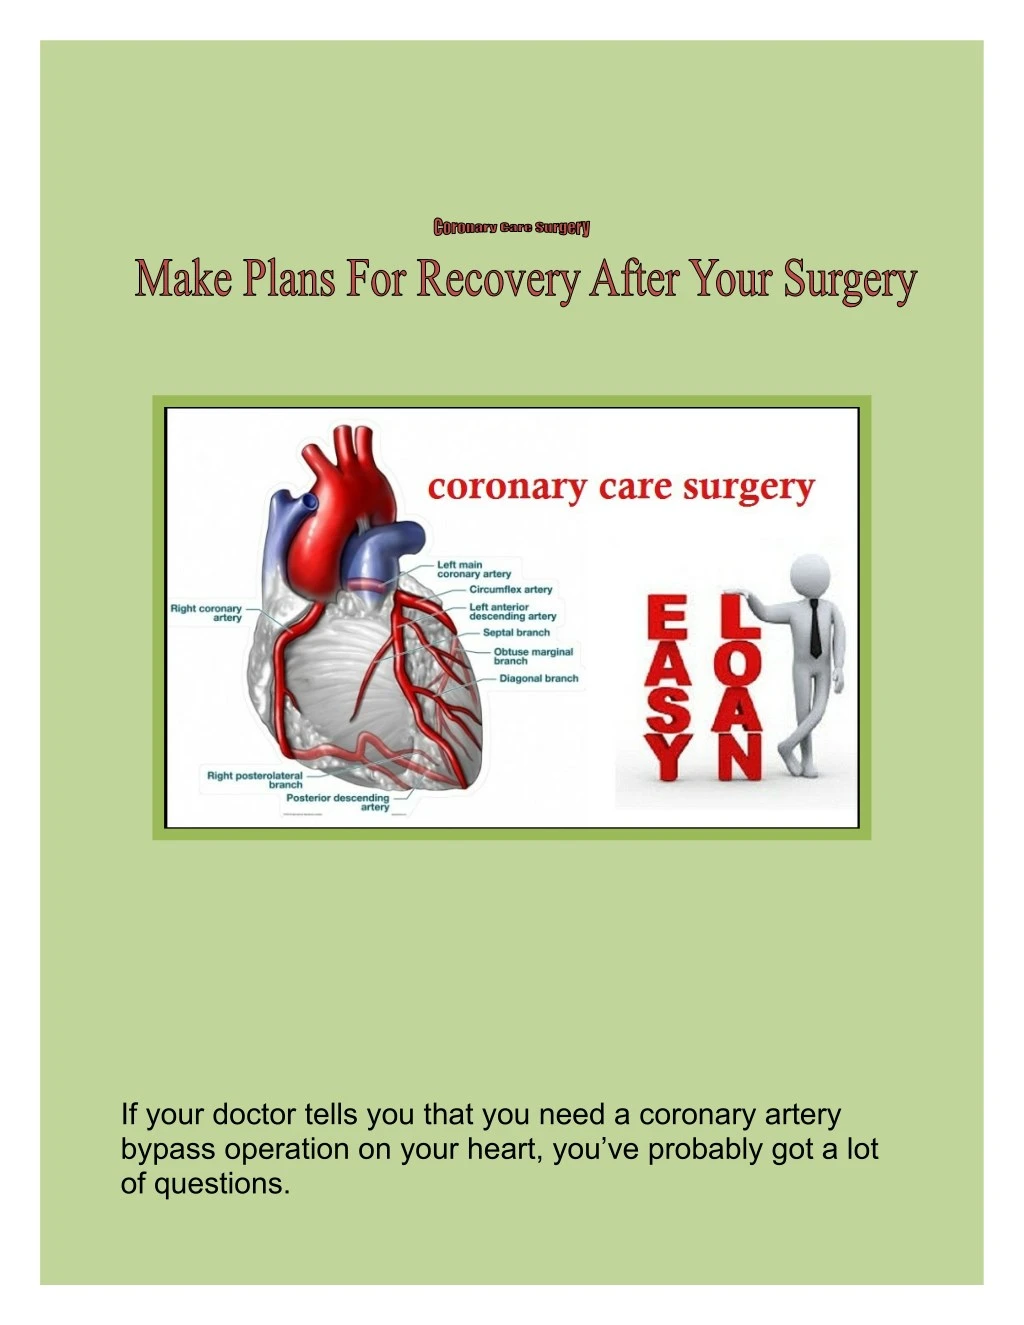 if your doctor tells you that you need a coronary